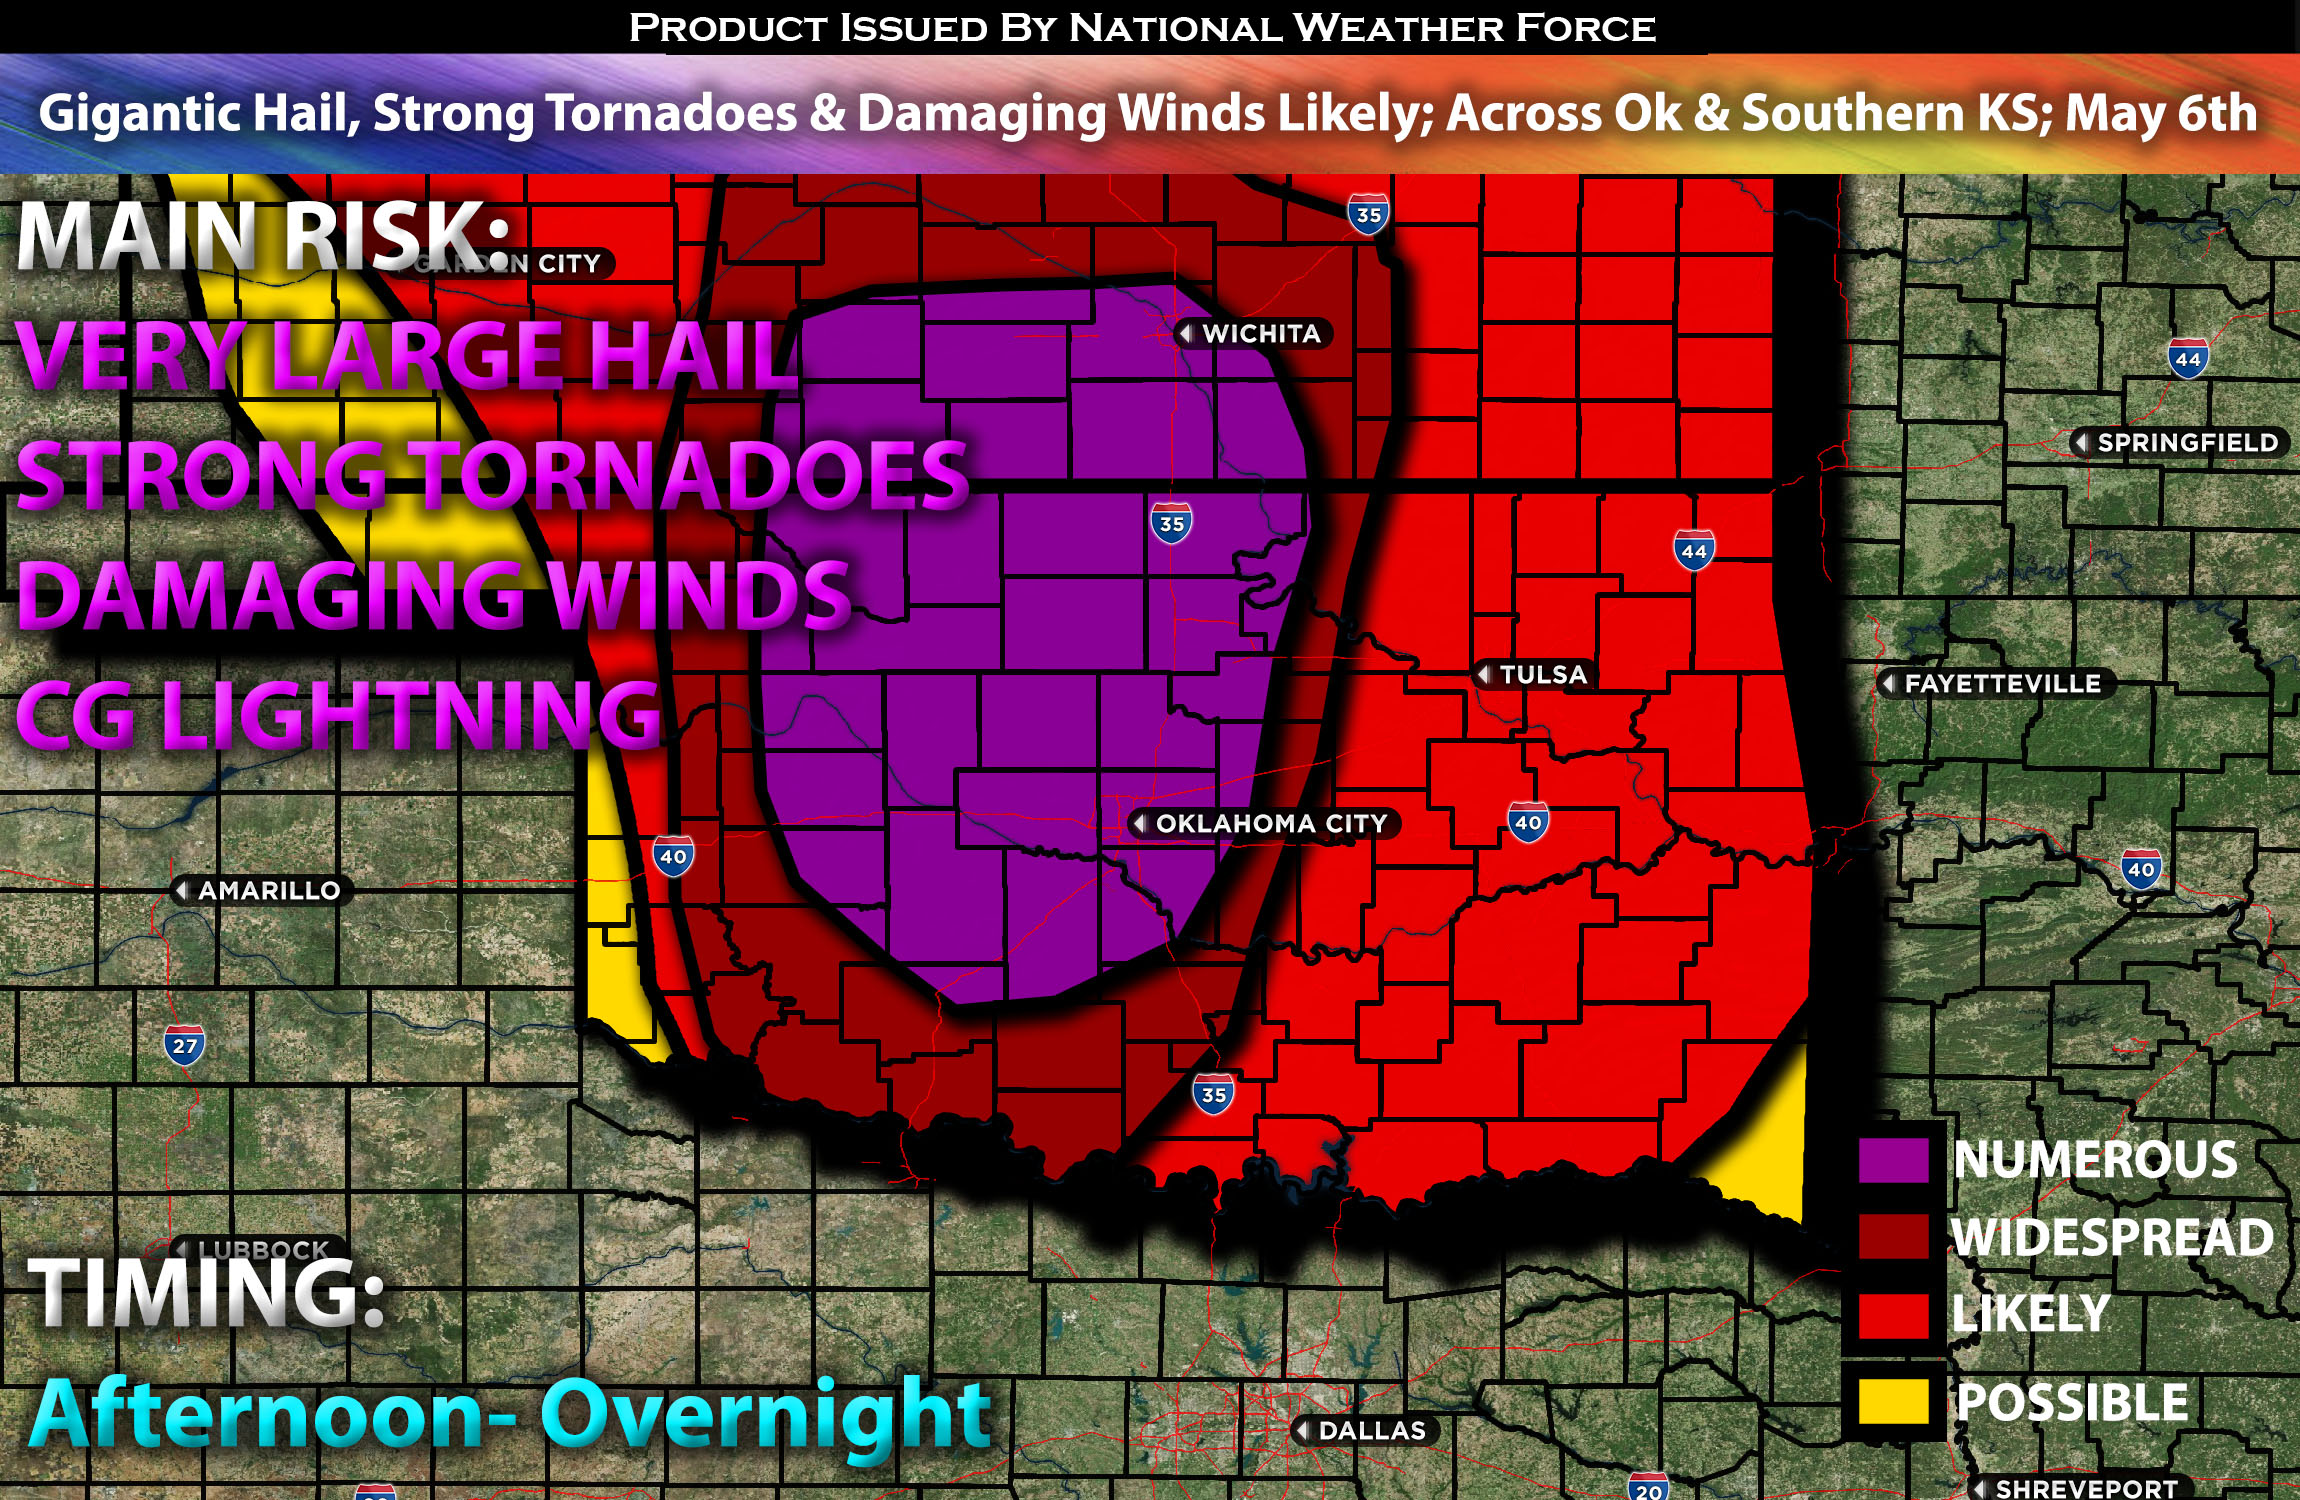 Gigantic Hail, Strong Tornadoes & Damaging Winds Likely; Across OK & Southern KS; May 6th